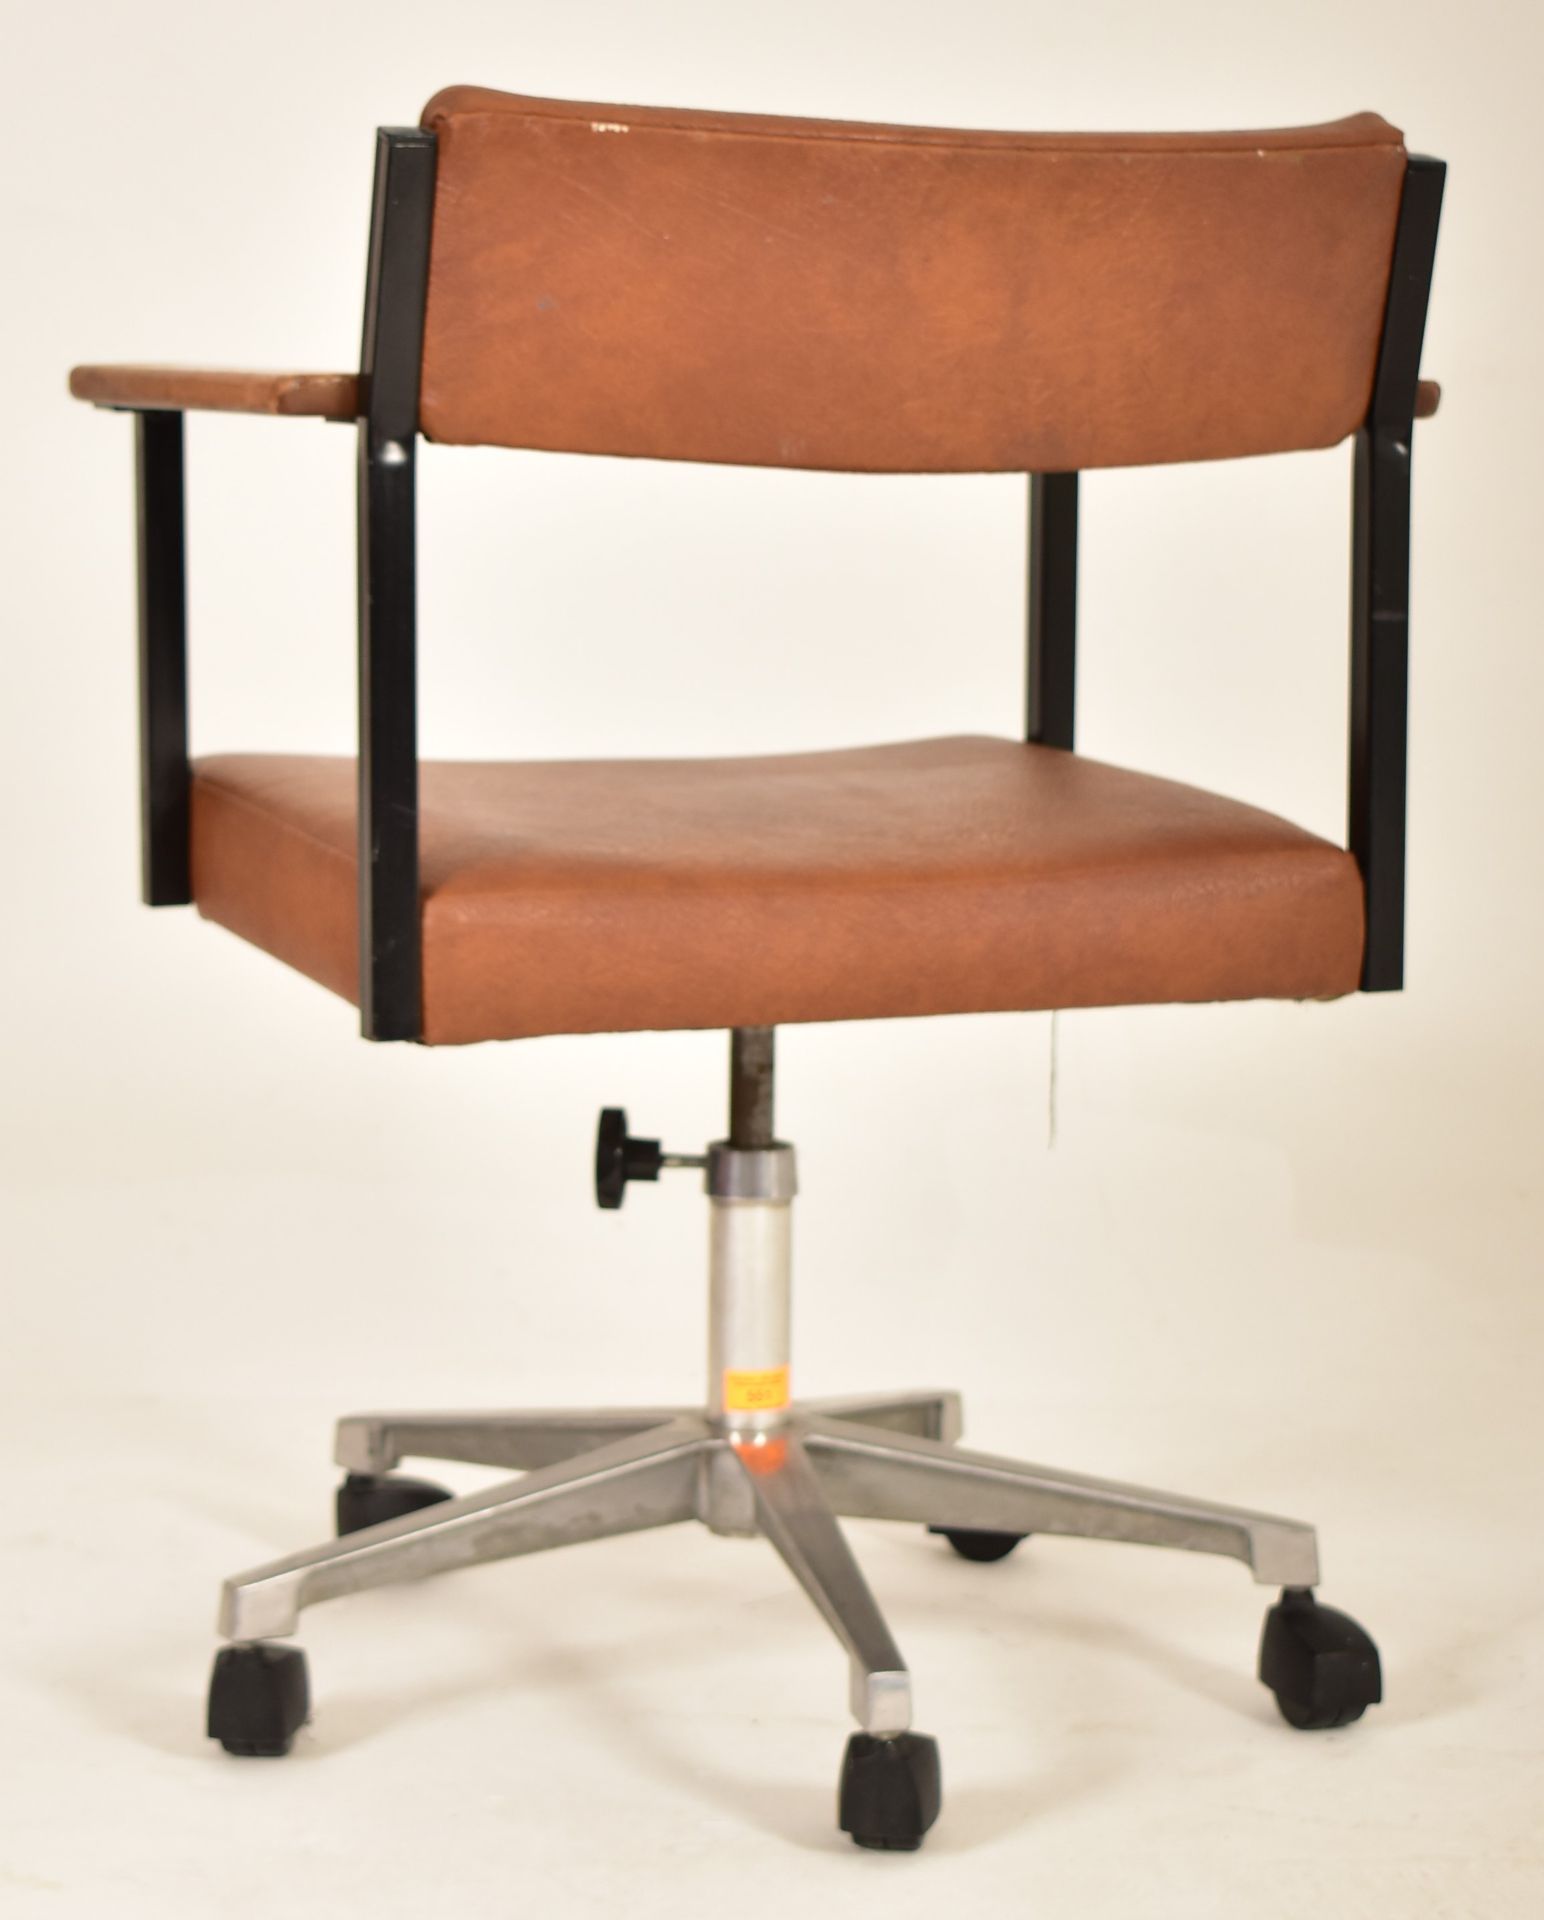 MID CENTURY 1970S LEATHER & CHROME SWIVEL OFFICE CHAIR - Image 5 of 5